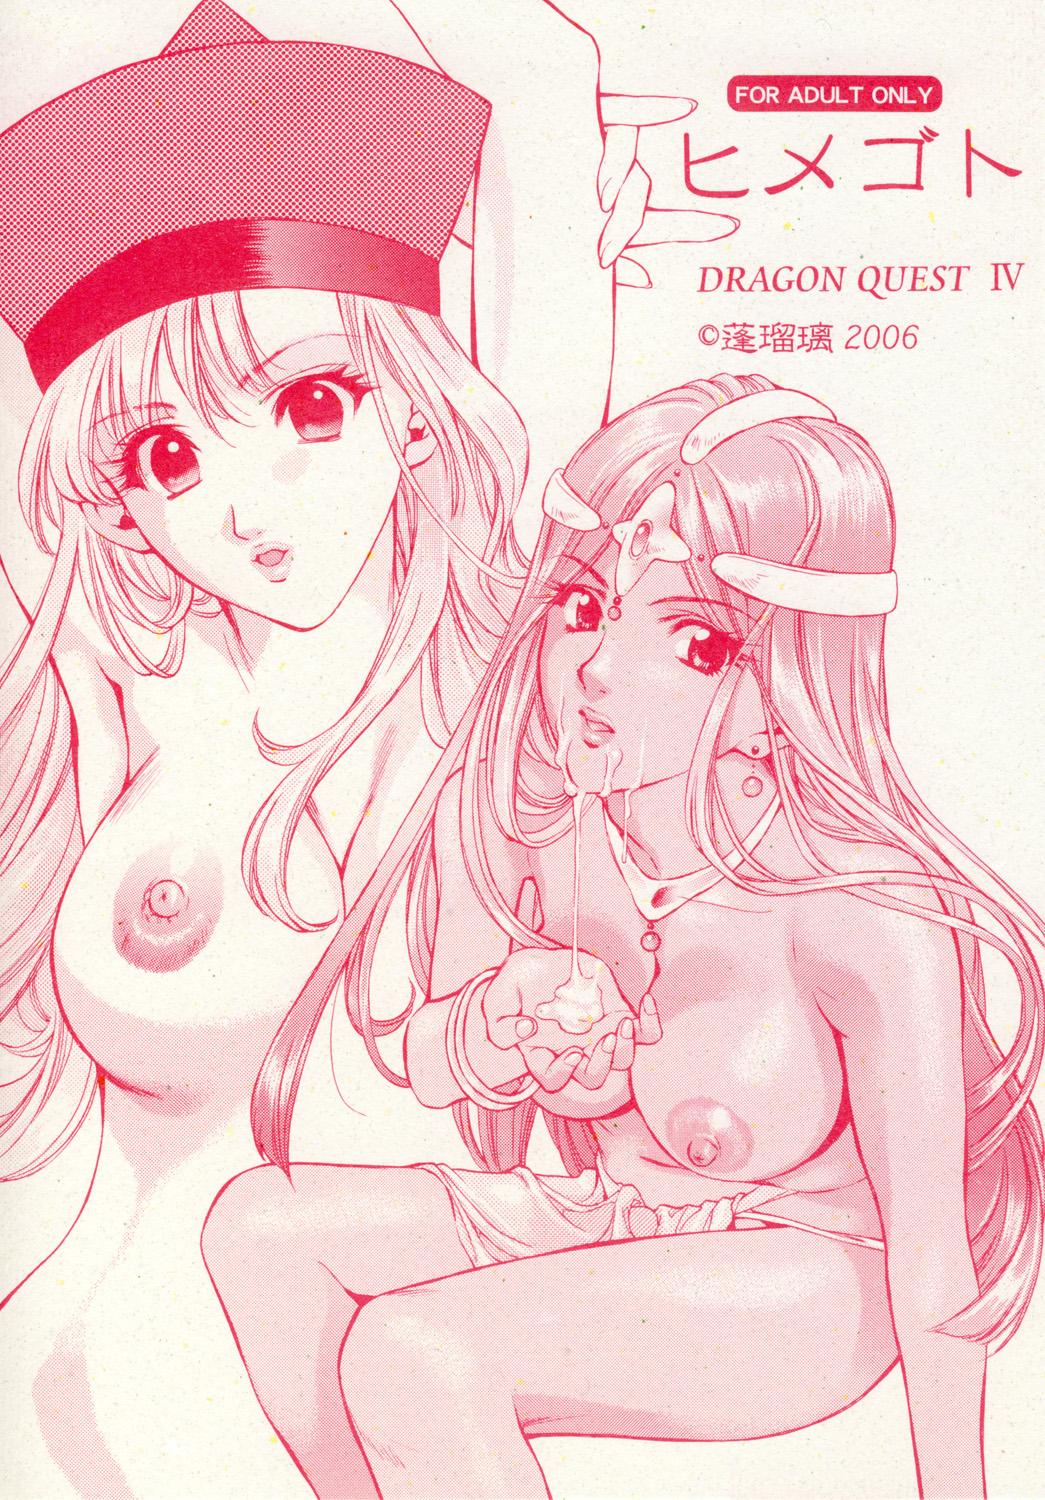 Bigtits Himegoto - Dragon quest iv Gayclips - Page 1